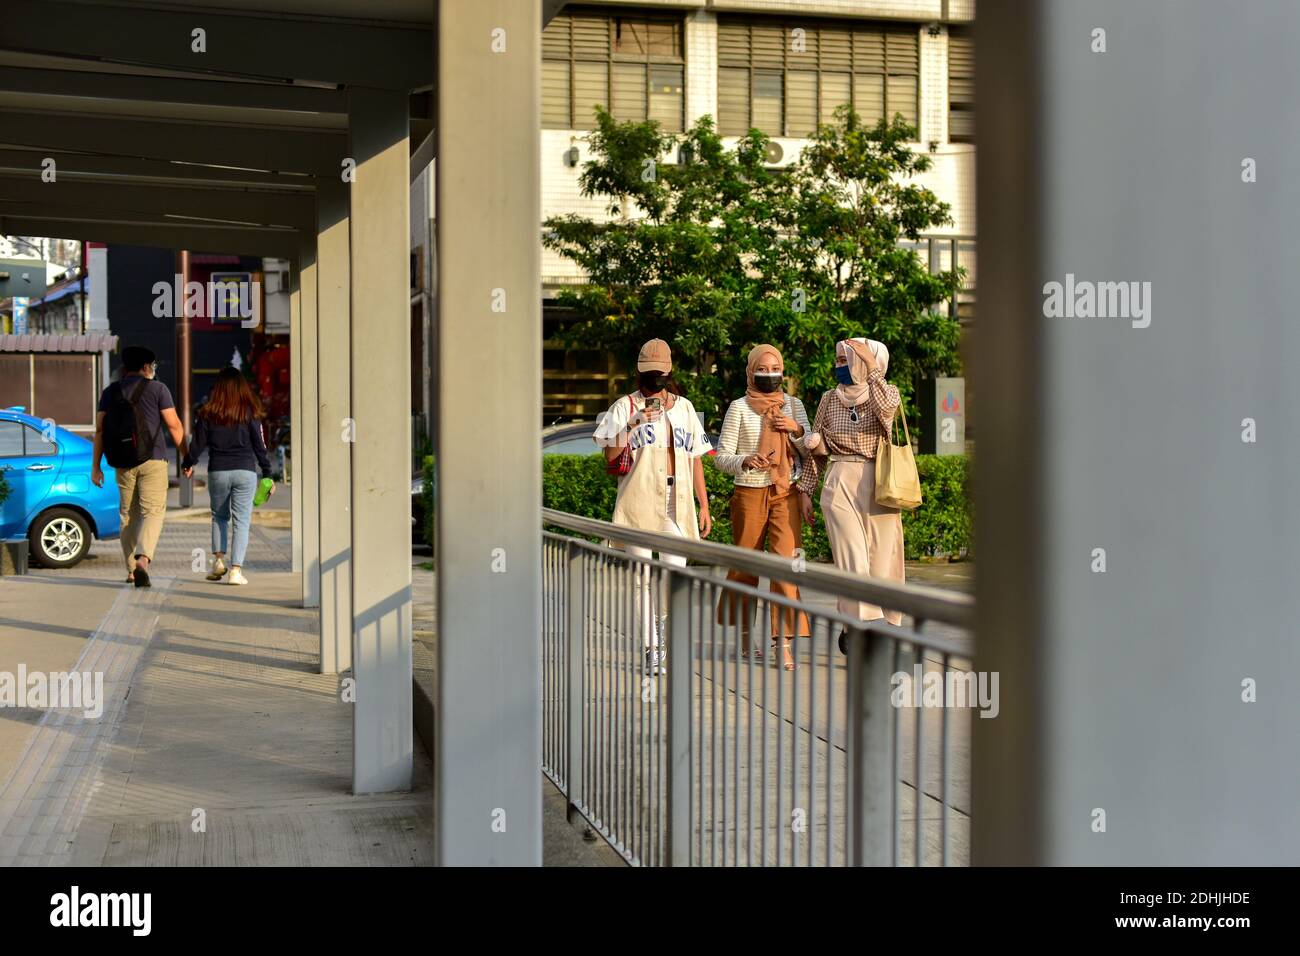 Kuala Lumpur, Malaysia. 11th Dec, 2020. Pedestrians wearing face masks walk on the street in Kuala Lumpur, Malaysia, Dec. 11, 2020. Malaysia reported 1,810 new COVID-19 infections, bringing the national total to 80,309, the health ministry said on Friday. Credit: Chong Voon Chung/Xinhua/Alamy Live News Stock Photo